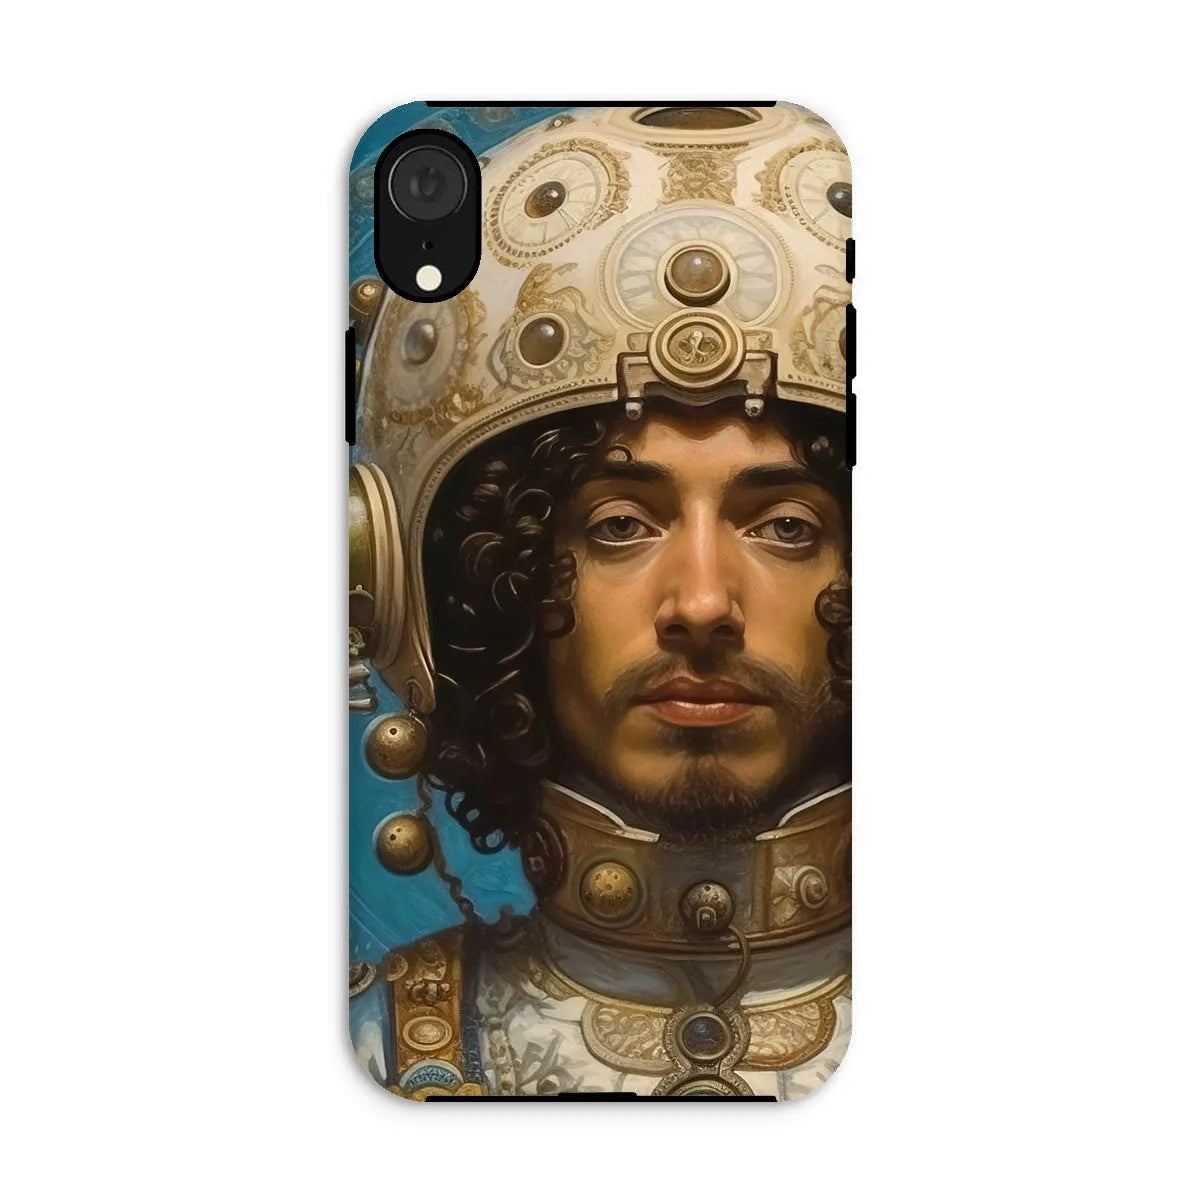 Mehdi The Gay Astronaut - Lgbtq Art Phone Case - Iphone Xr / Matte - Mobile Phone Cases - Aesthetic Art